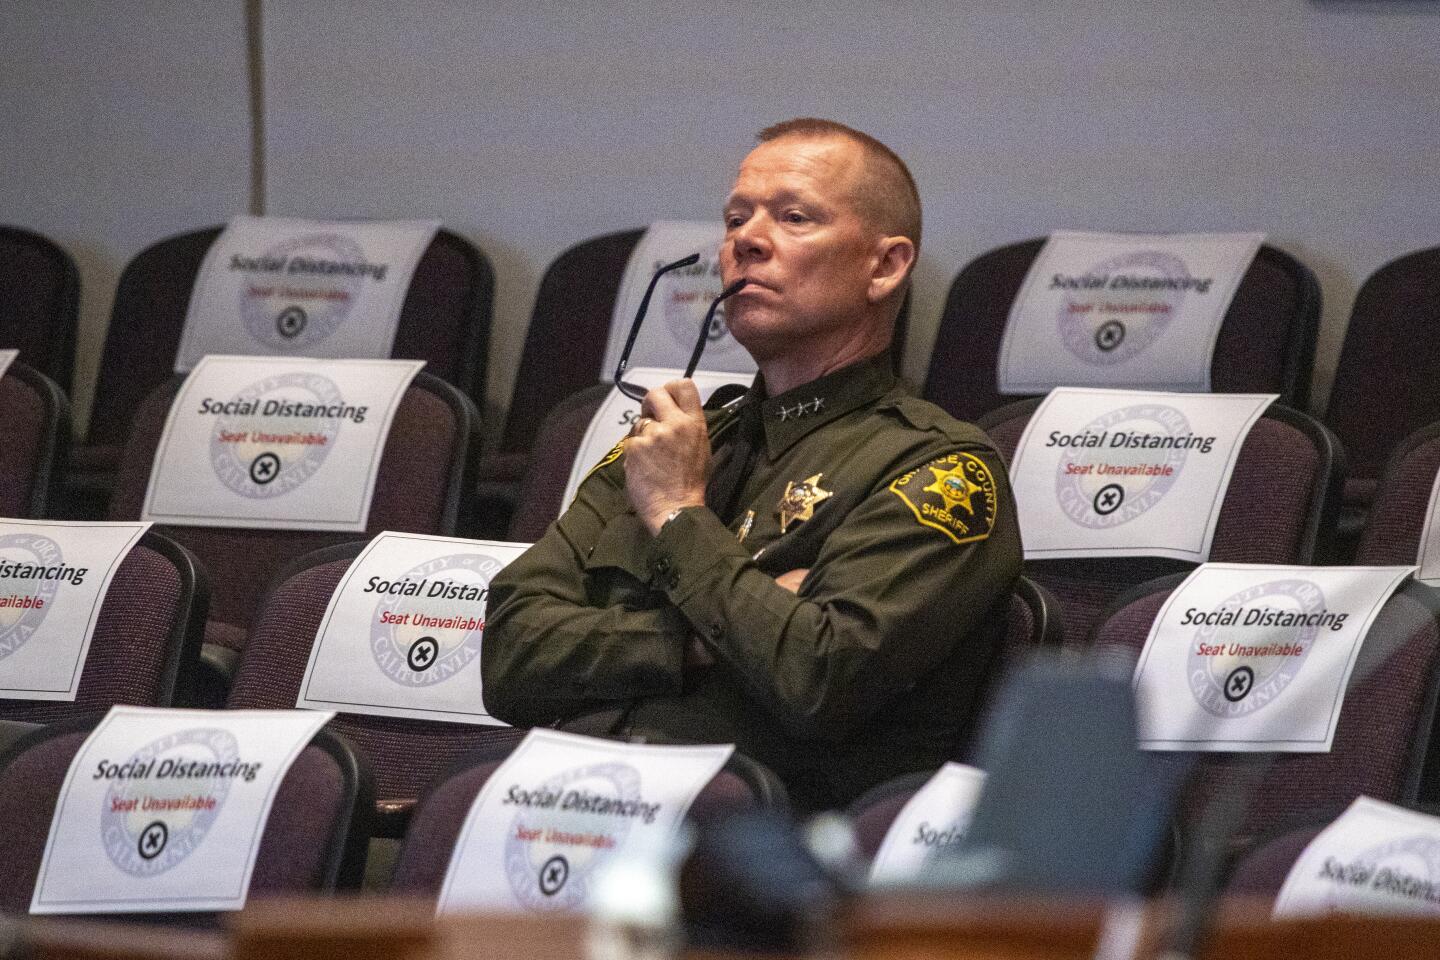 Orange County Undersheriff Bob Peterson listens during a board of supervisors discussion on combating the coronavirus in Santa Ana.